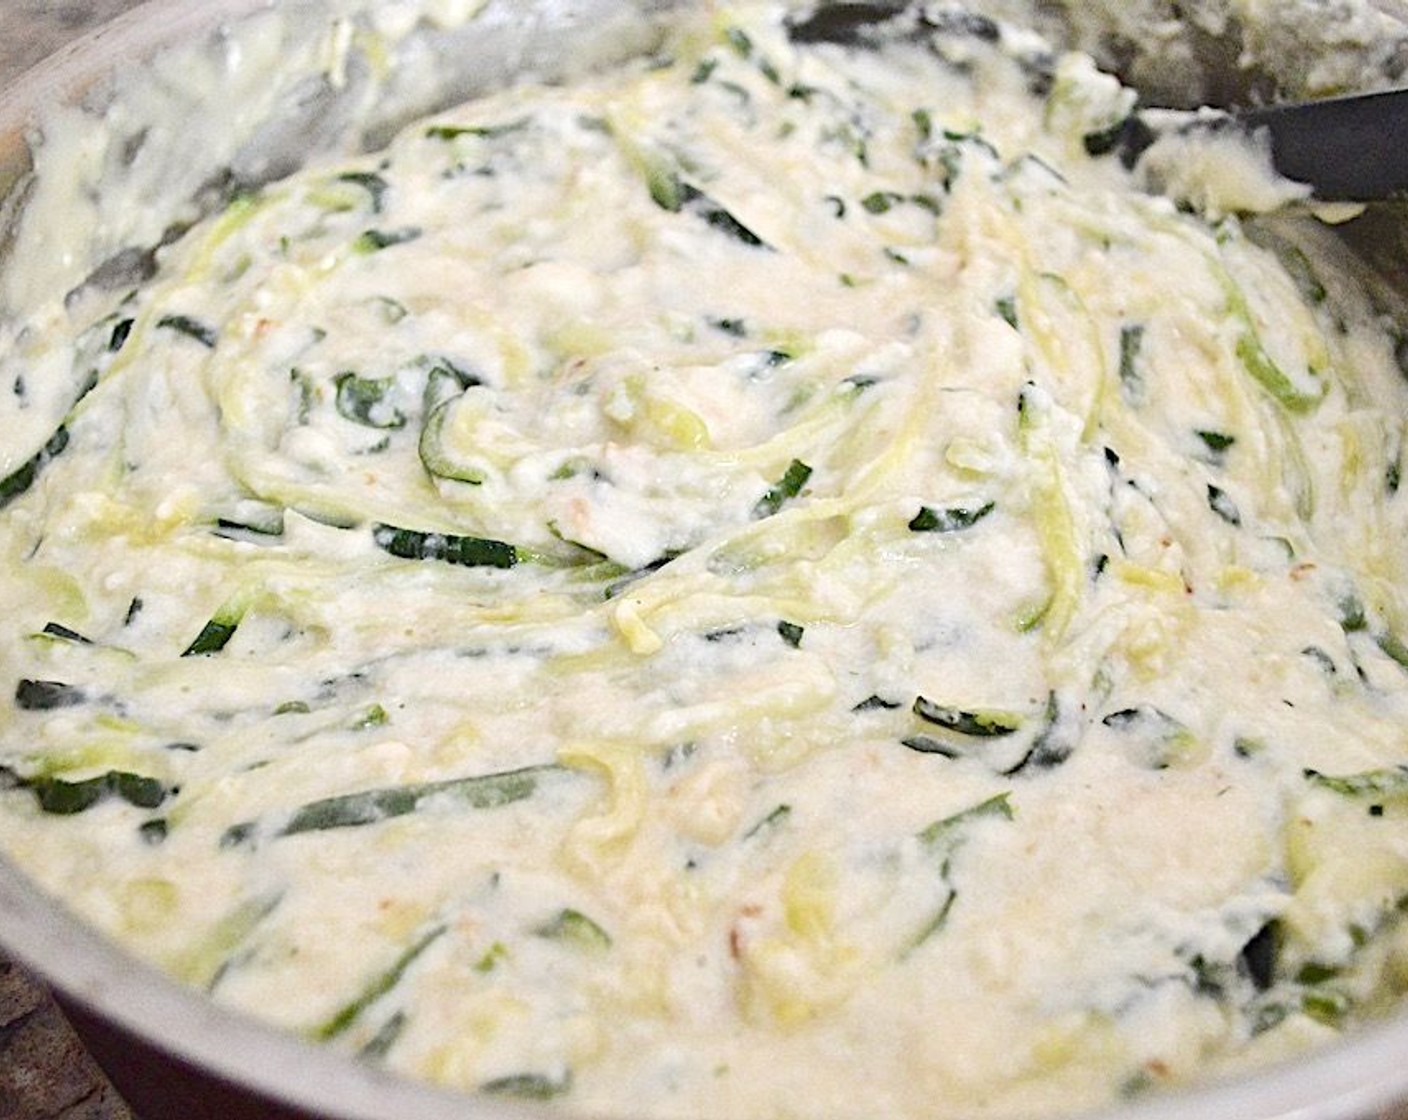 step 5 Drain the zoodles and set them aside. Whisk the Smoked Cheddar Cheese (1 3/4 cups), Dubliner Cheese (1 2/3 cups), and Parmesan Cheese (1/4 cup) into the white sauce until smooth.